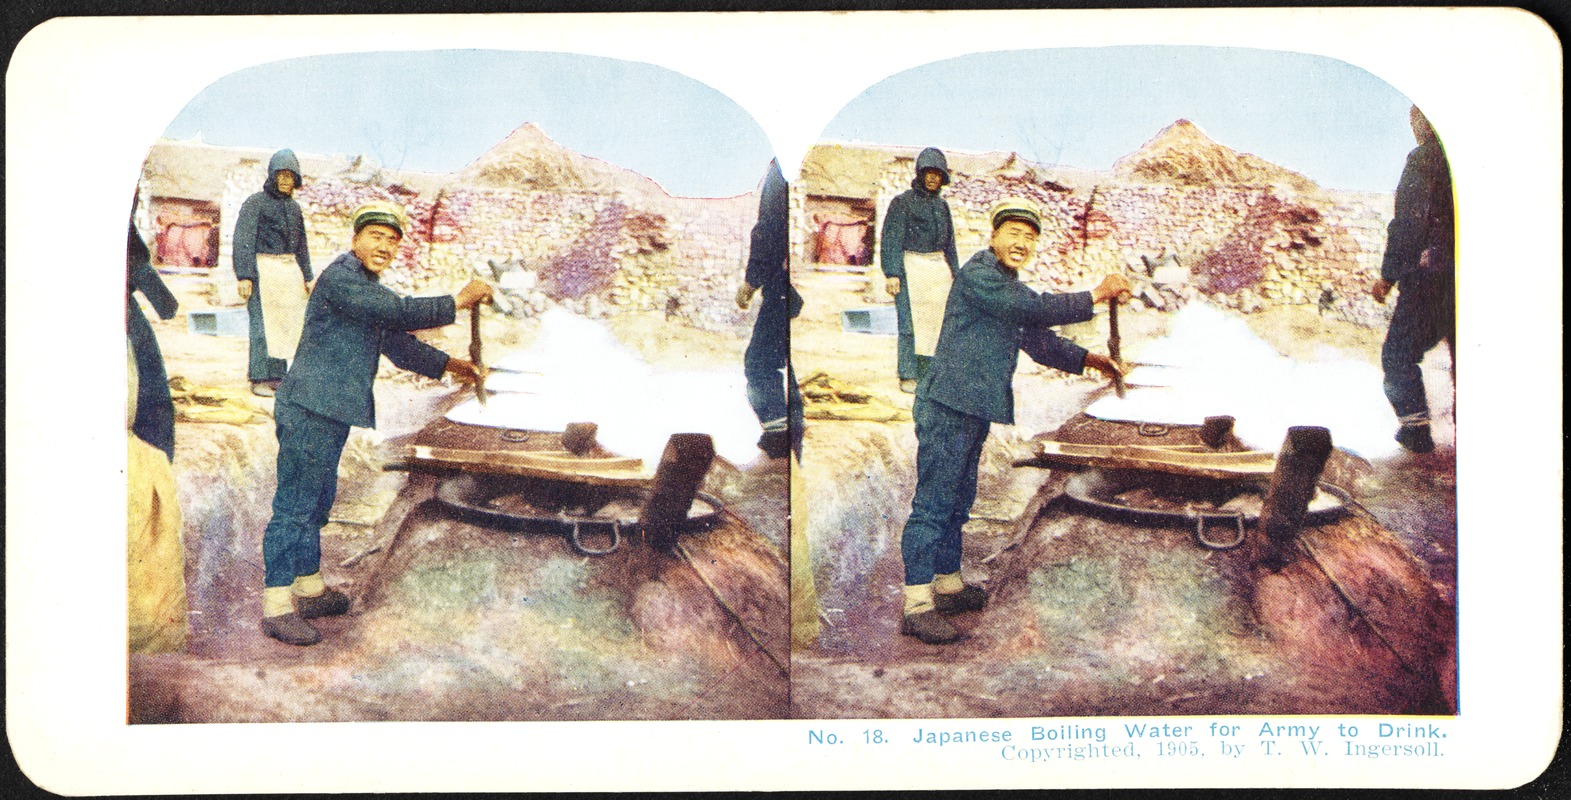 Japanese preparing water for the army to drink